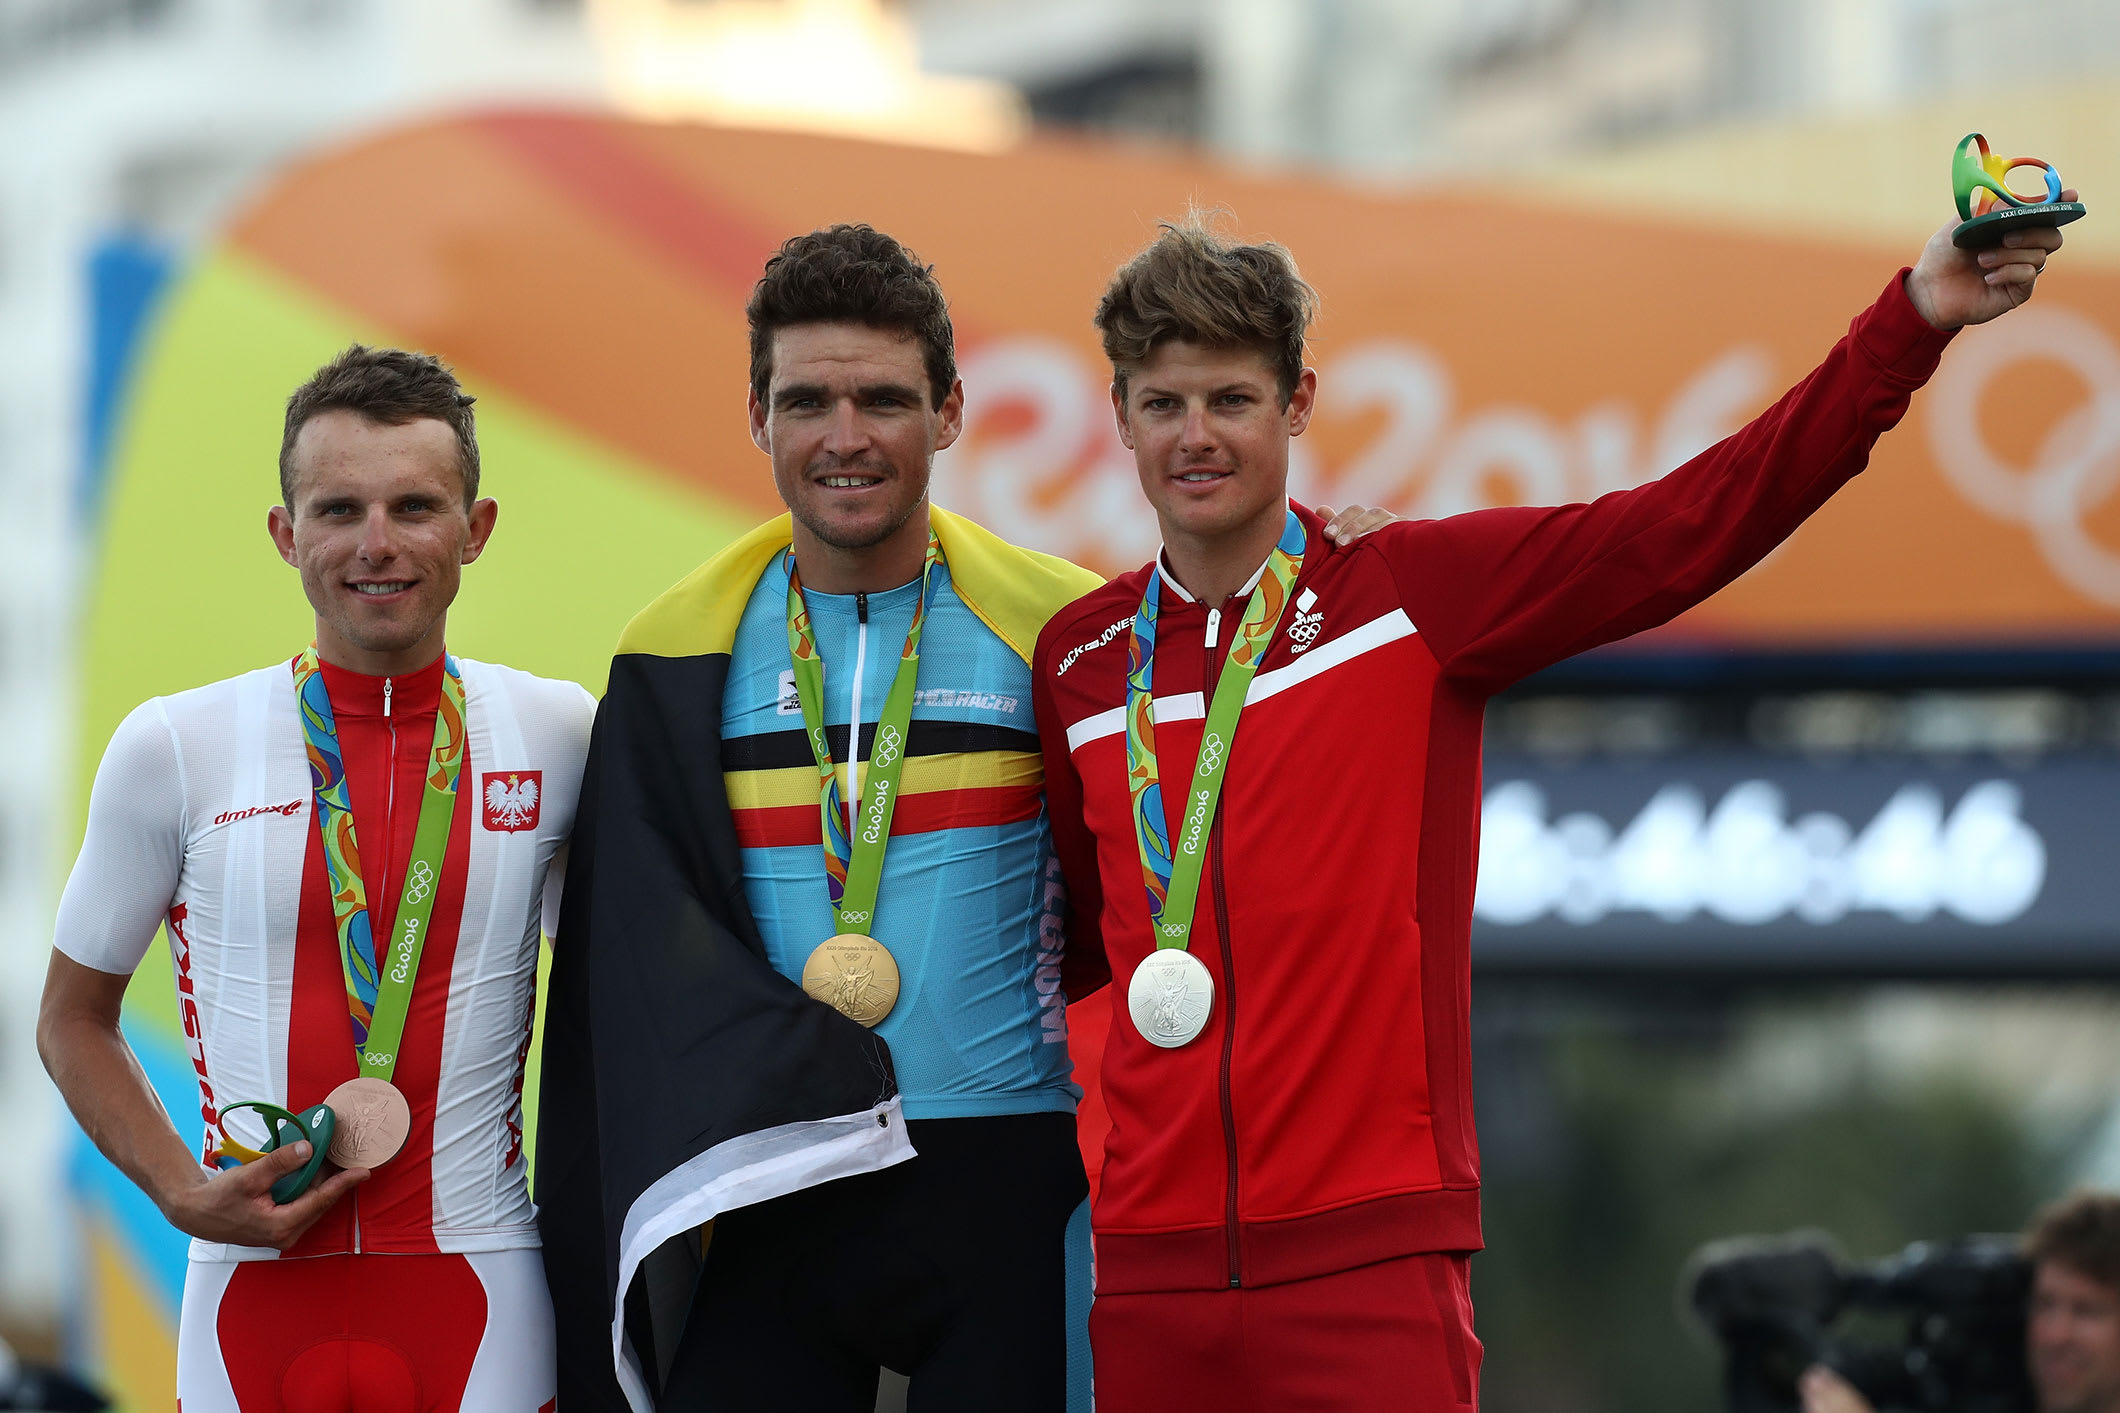  Silver medalist Jakob Fuglsang of Denmark, Gold medalist Greg van Avermaet of Belgium and bronze medalist Rafal Majka of Poland celebrate on the podium at the medal ceremony for the Men's Road Race on Day 1 of the Rio 2016 Olympic Games at the Fort Copacabana on August 6, 2016 in Rio de Janeiro, Brazil